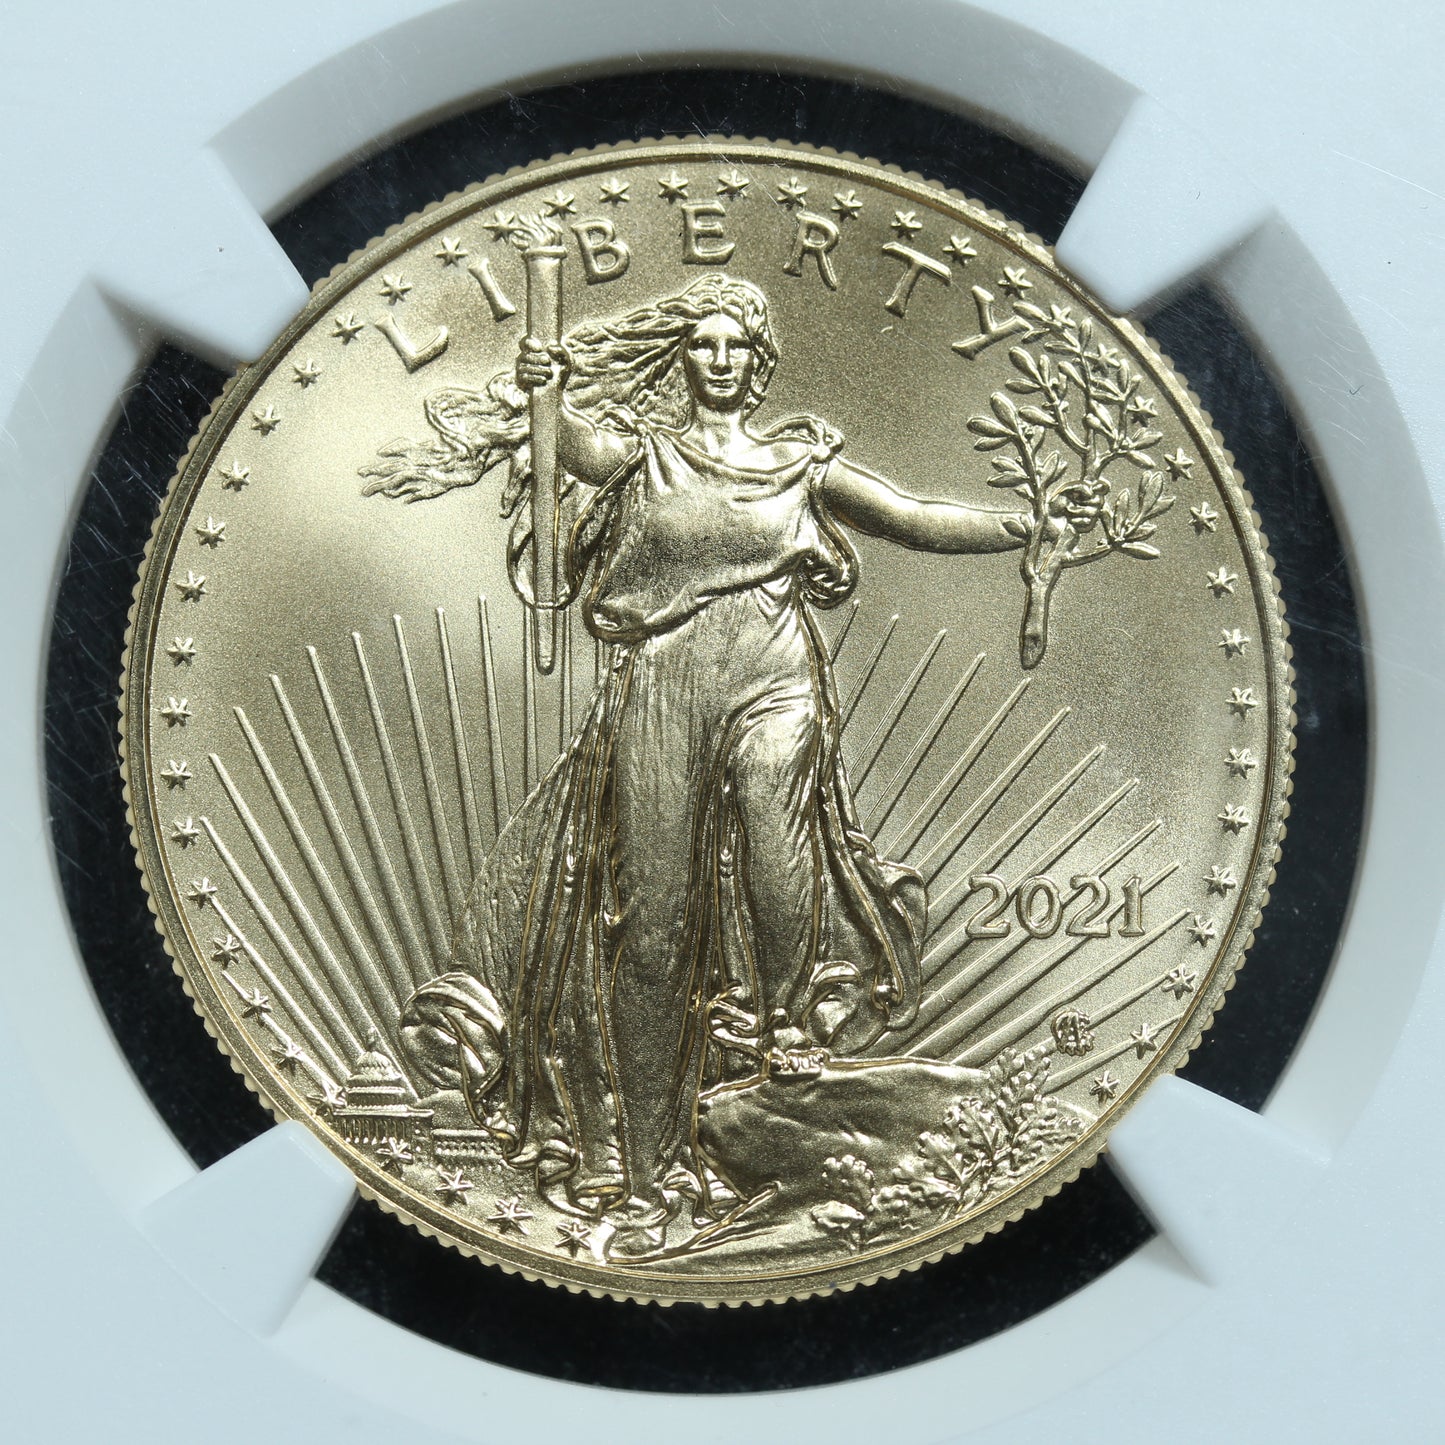 2021 1 oz Gold Eagle $50 Type 2 - NGC MS 70 First Day of Issue